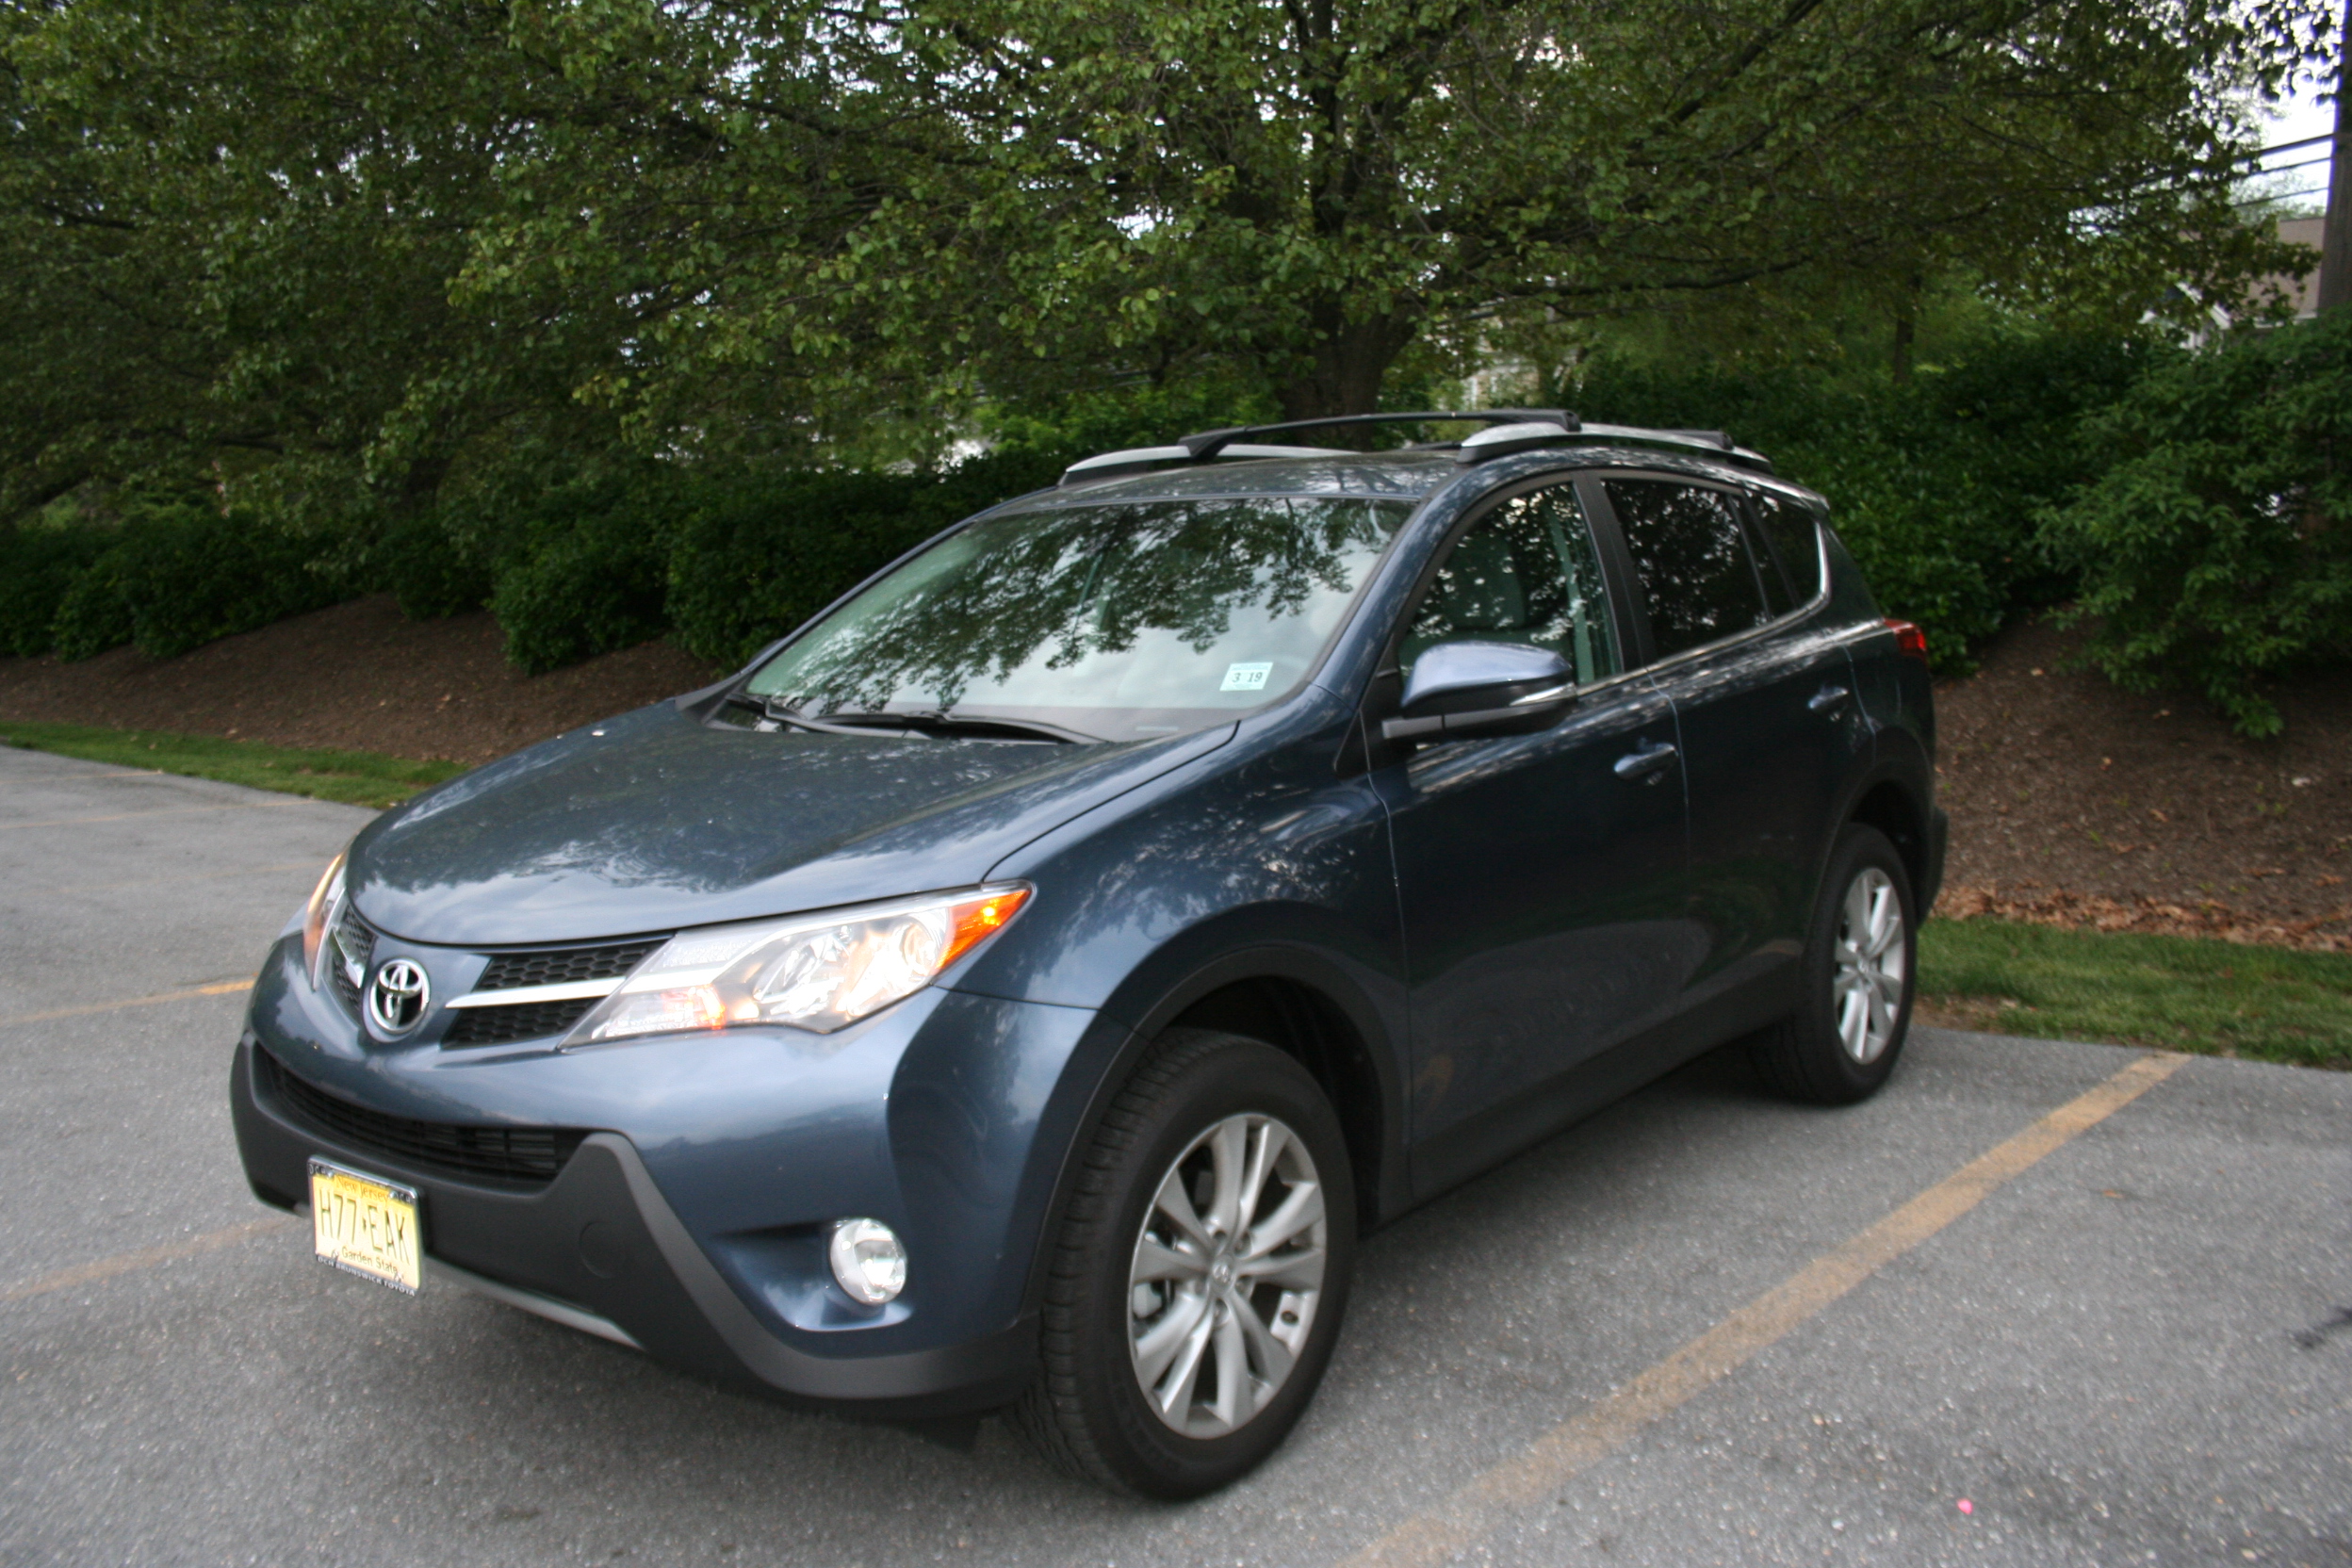 Car Report: Toyota’s RAV4 is a small crossover with lots of space